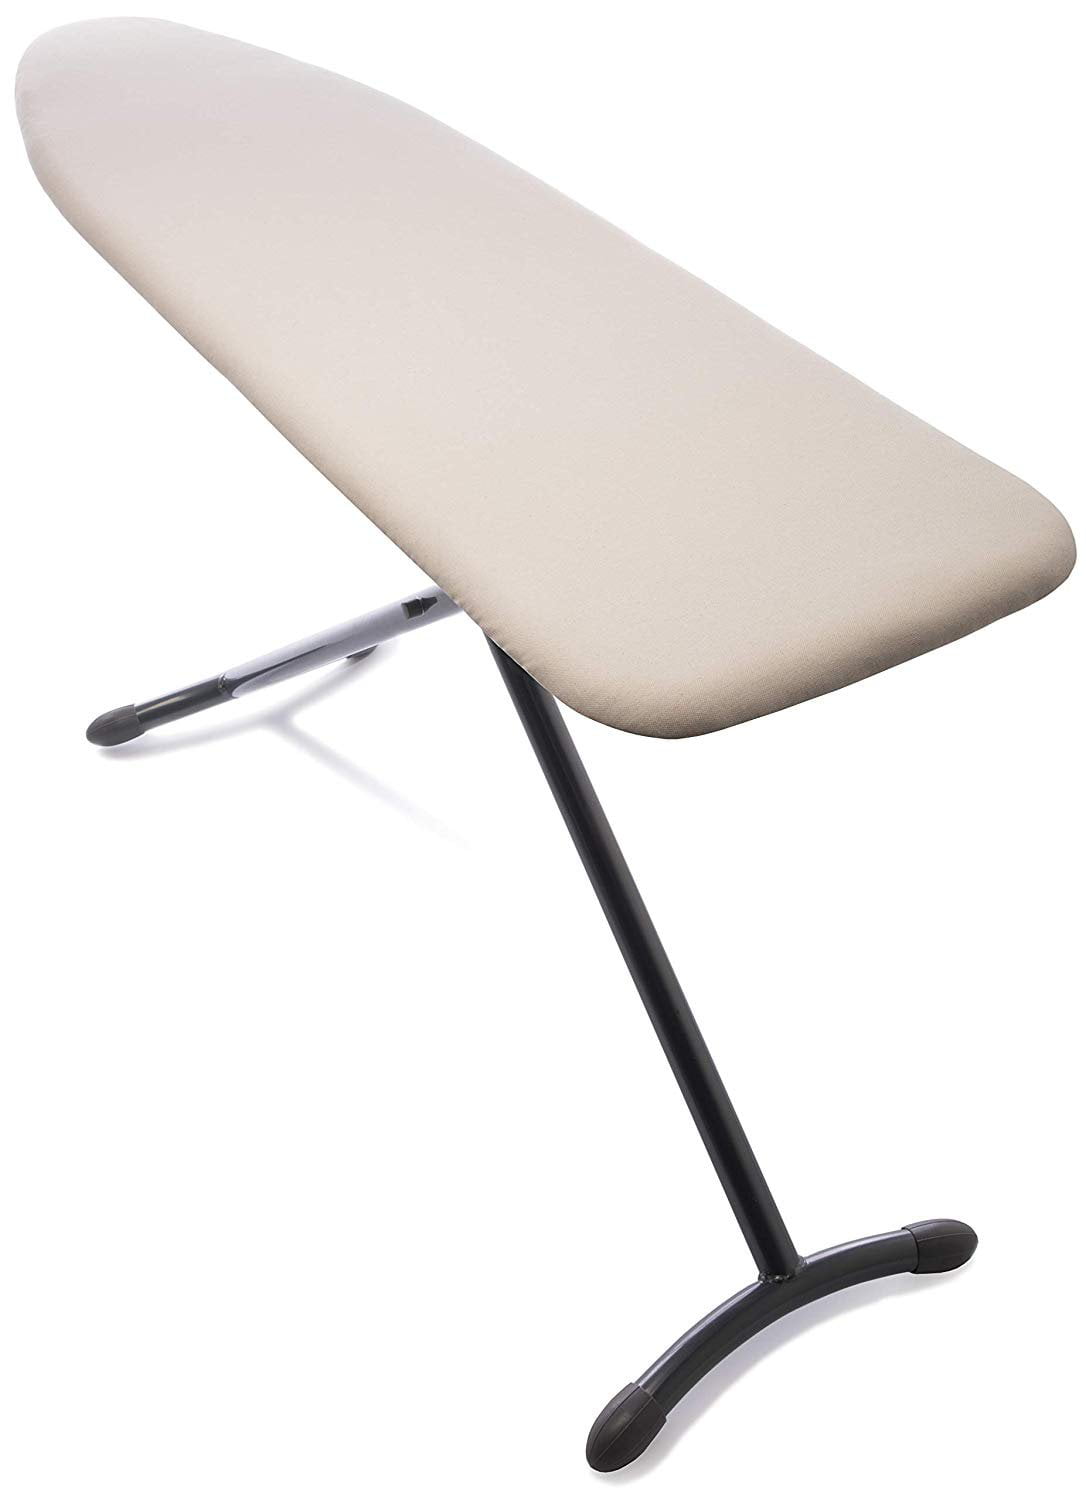 Unbleached 48" x 14" Ironing Board cover 100% Cotton Untreated Chemical-free 